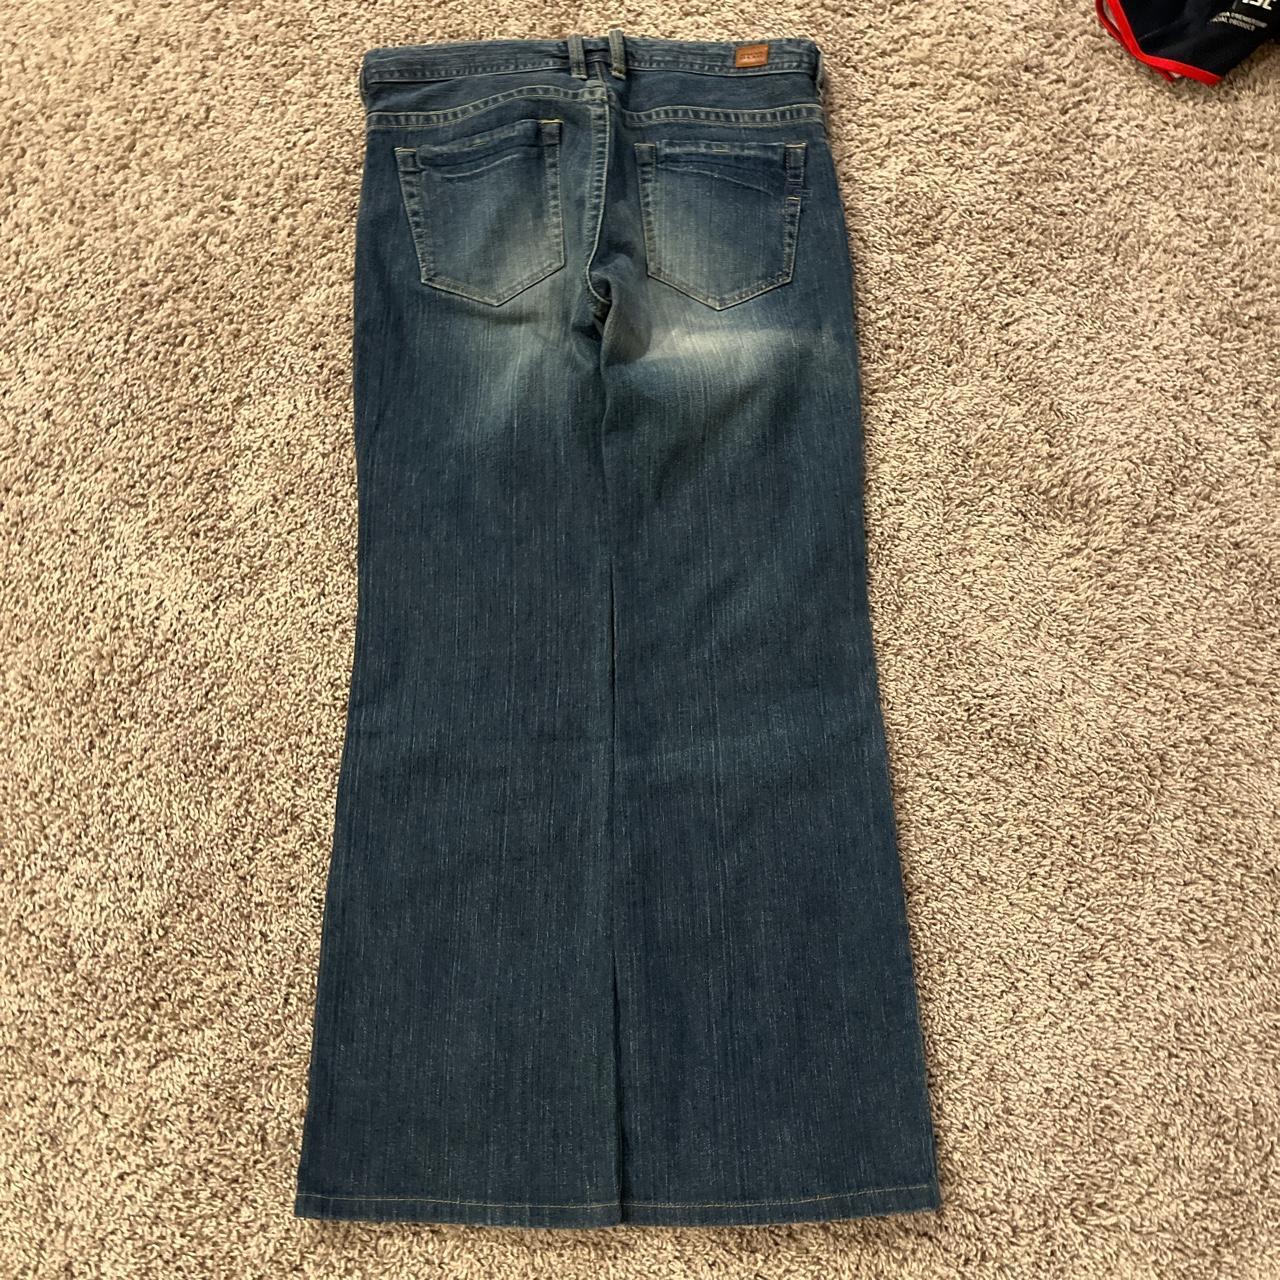 Nicole club for men flared jeans about 32 inch waist... - Depop